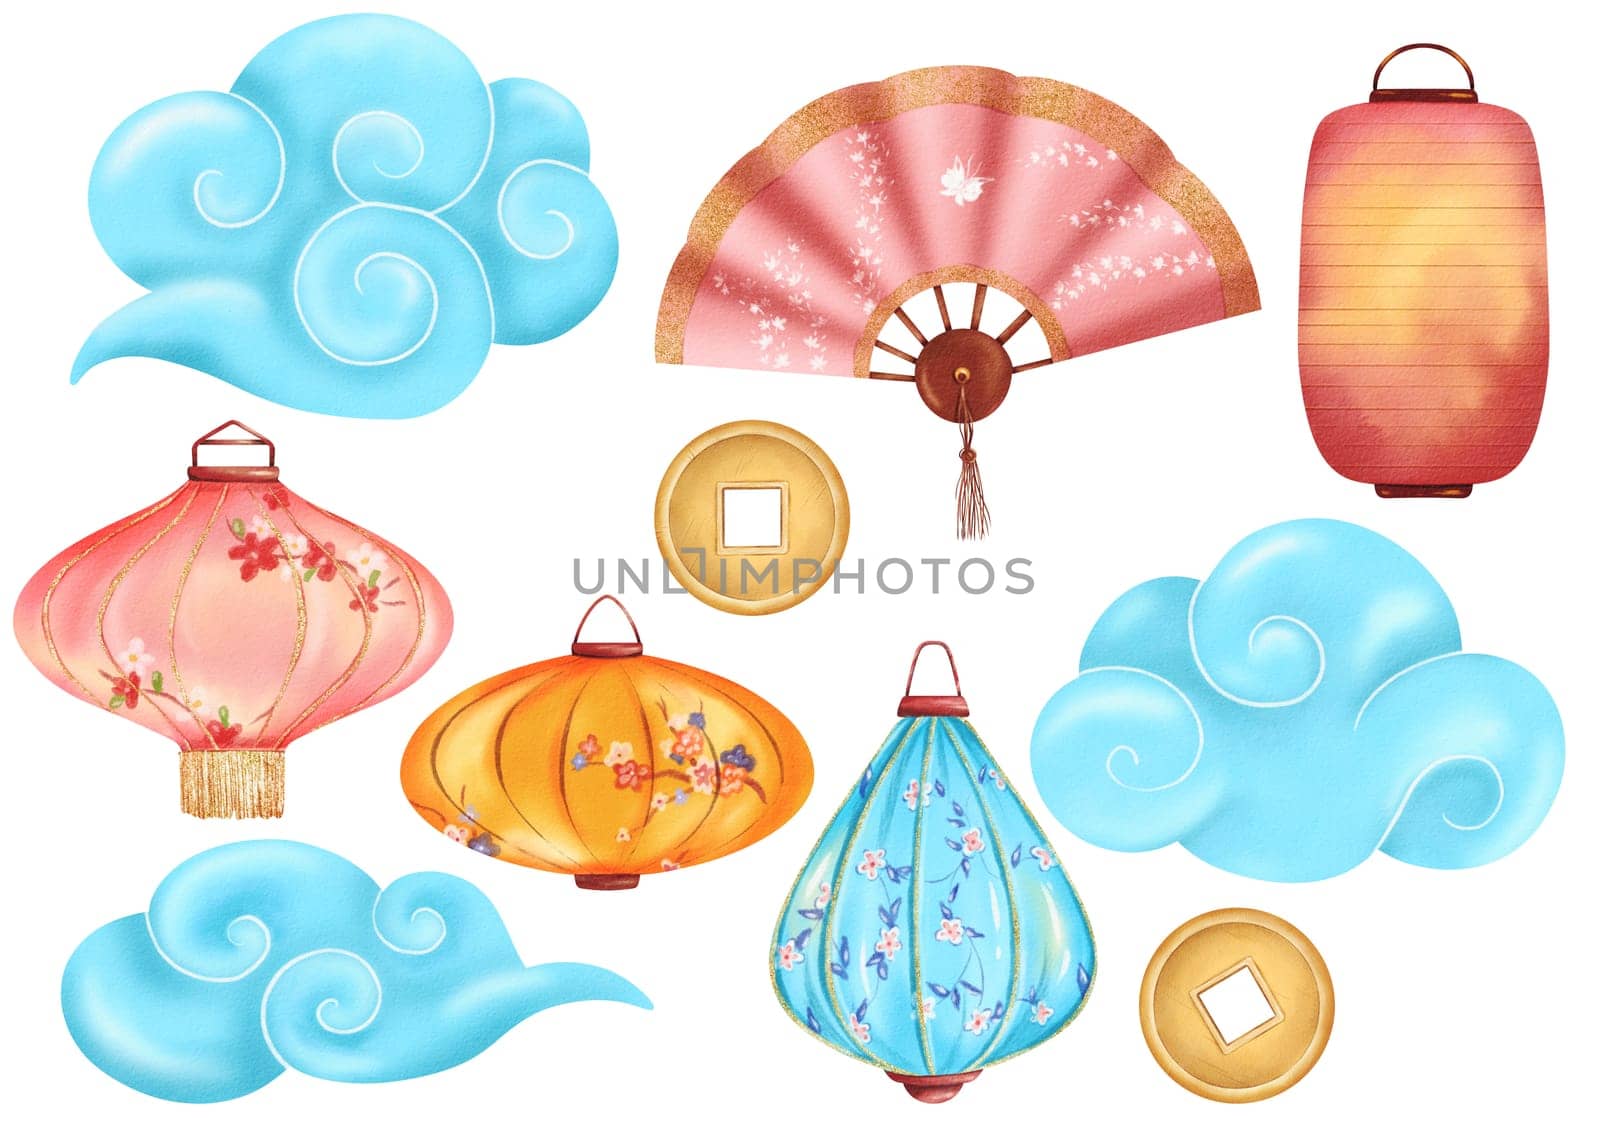 Set of watercolor isolated elements: cloud, fan, golden coins, and paper Chinese lanterns, all in a Chinese-style design. Perfect for Chinese New Year, Lantern Festival, or depicting Eastern culture.